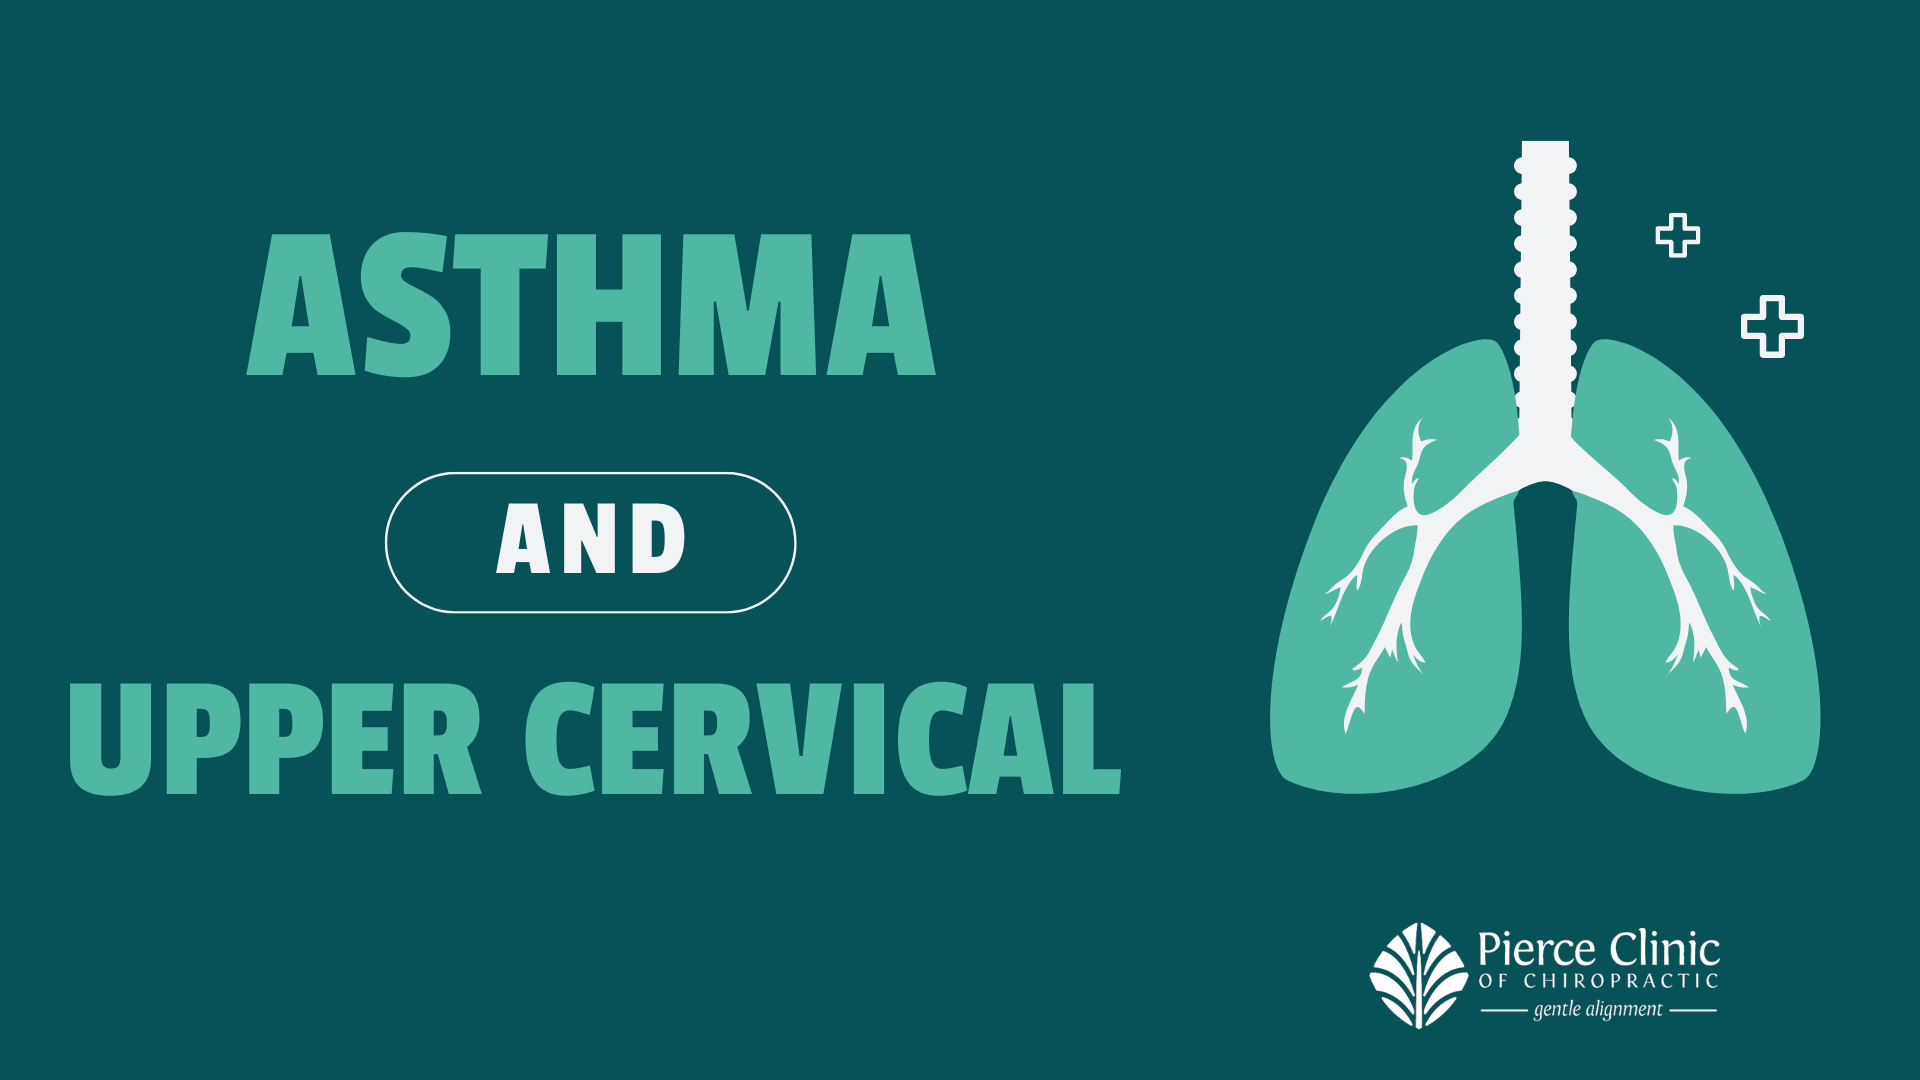 A Poster That Says Asthma and Upper Cervical — St. Peterburg, FL — Pierce Clinic of Chiropractic